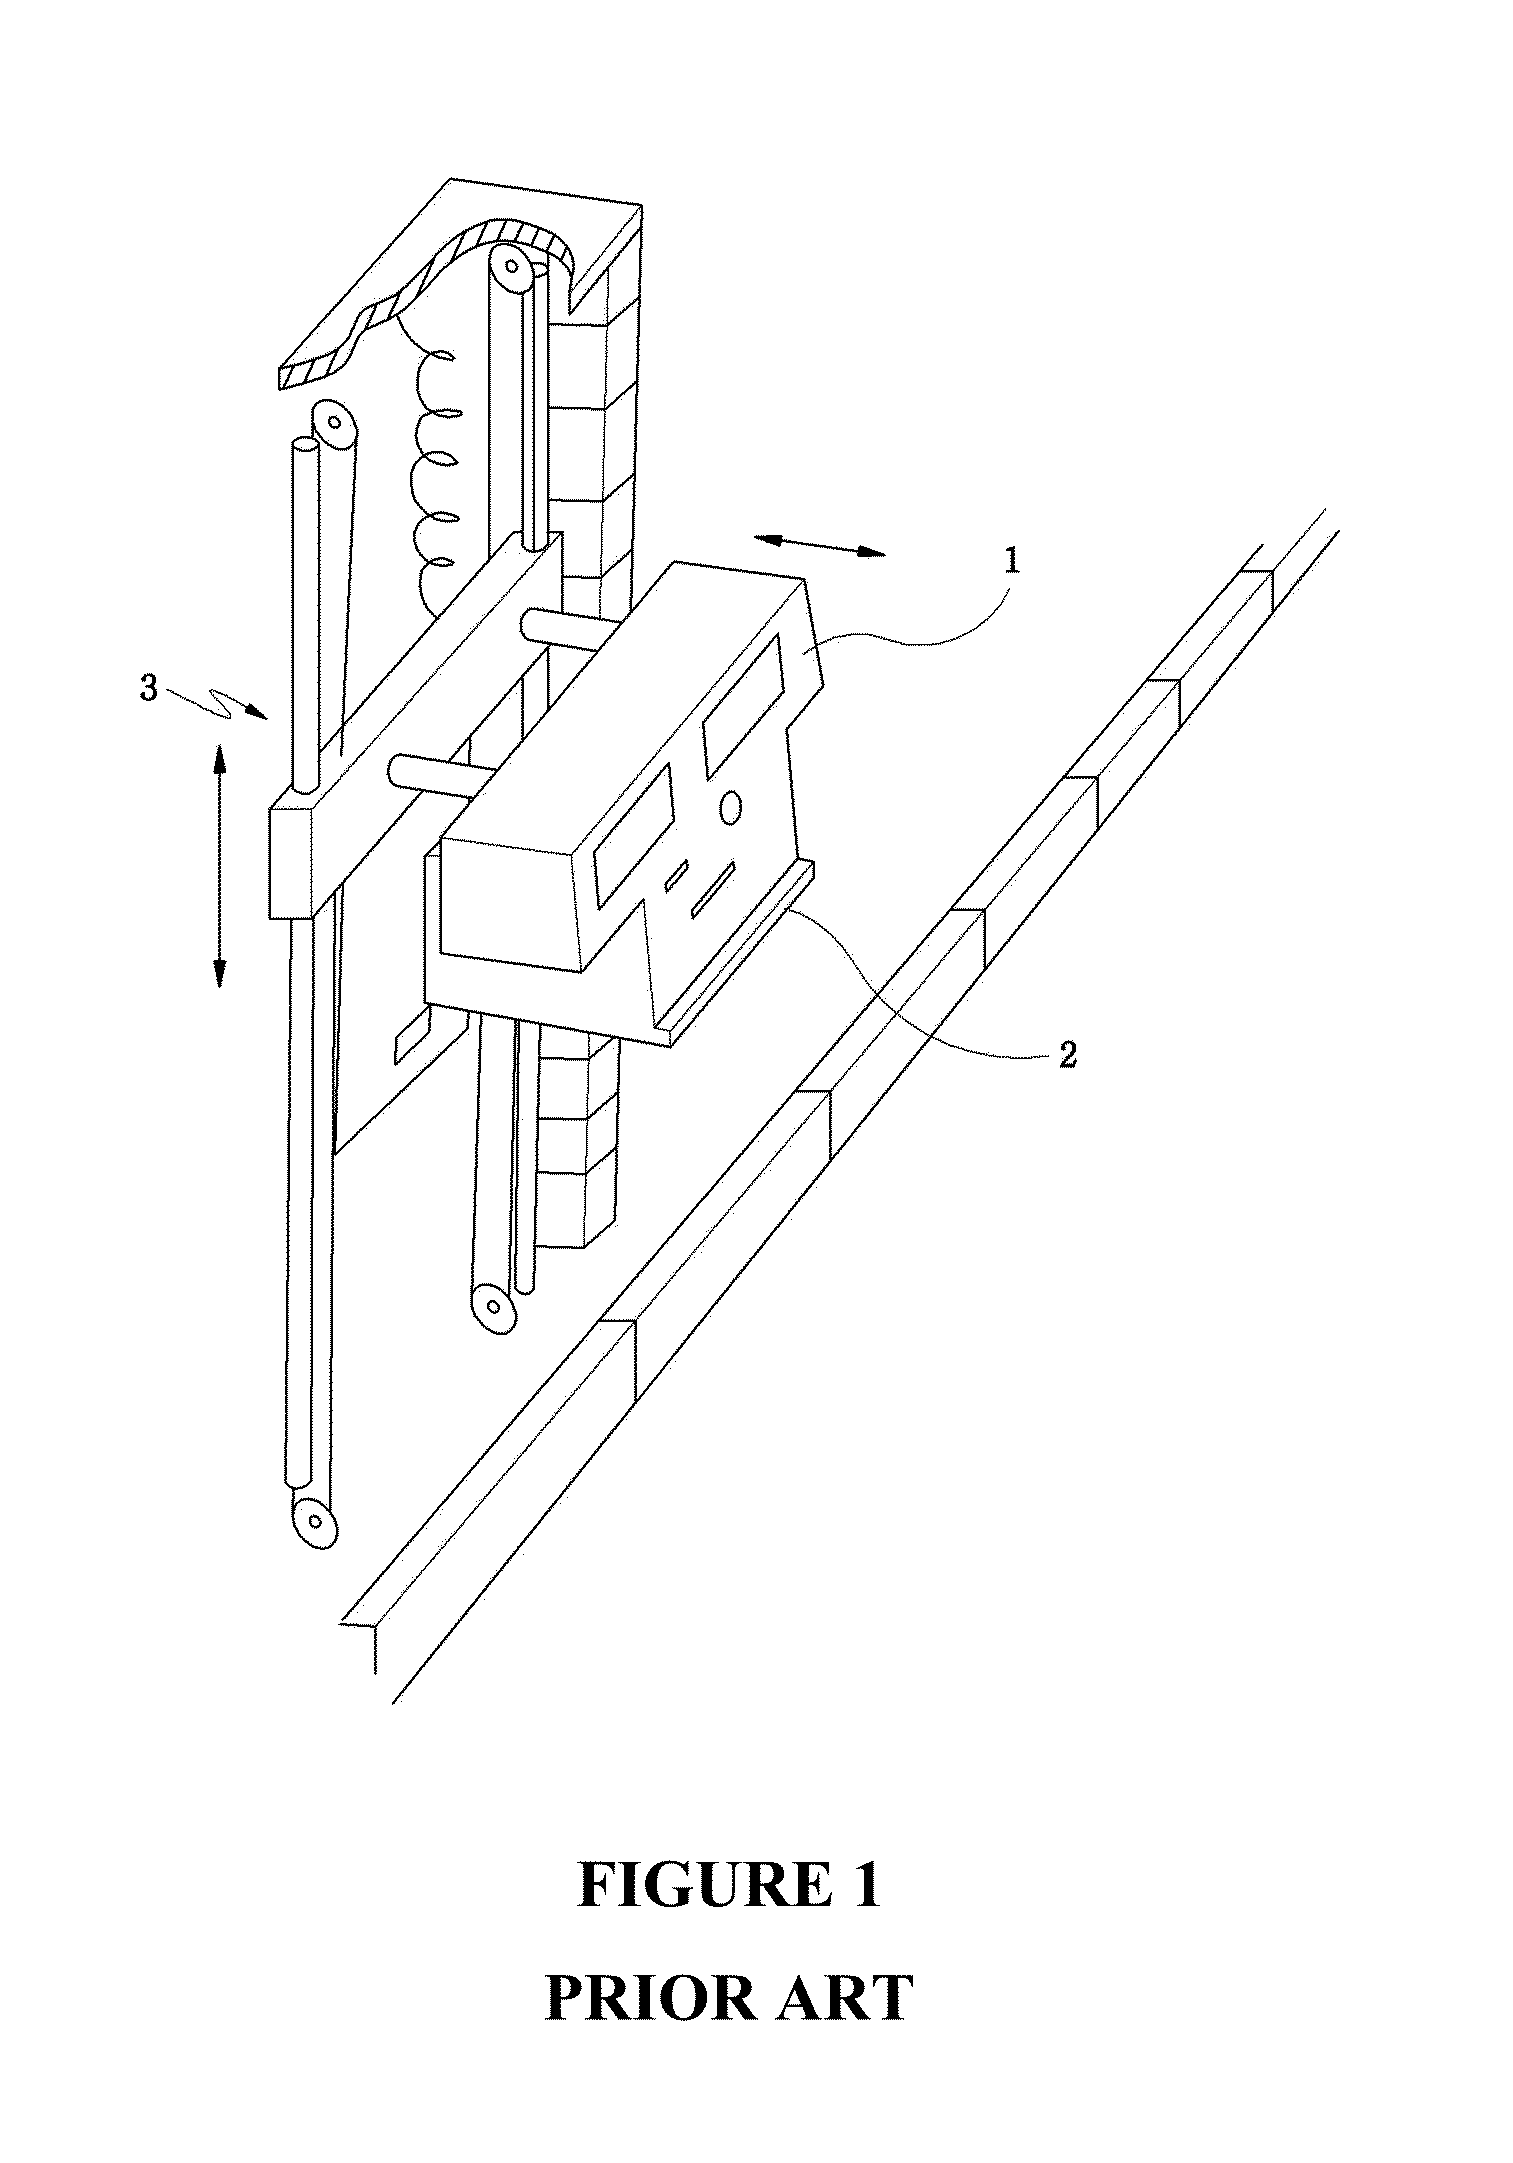 Automatic teller machine (ATM) for vehicle driver